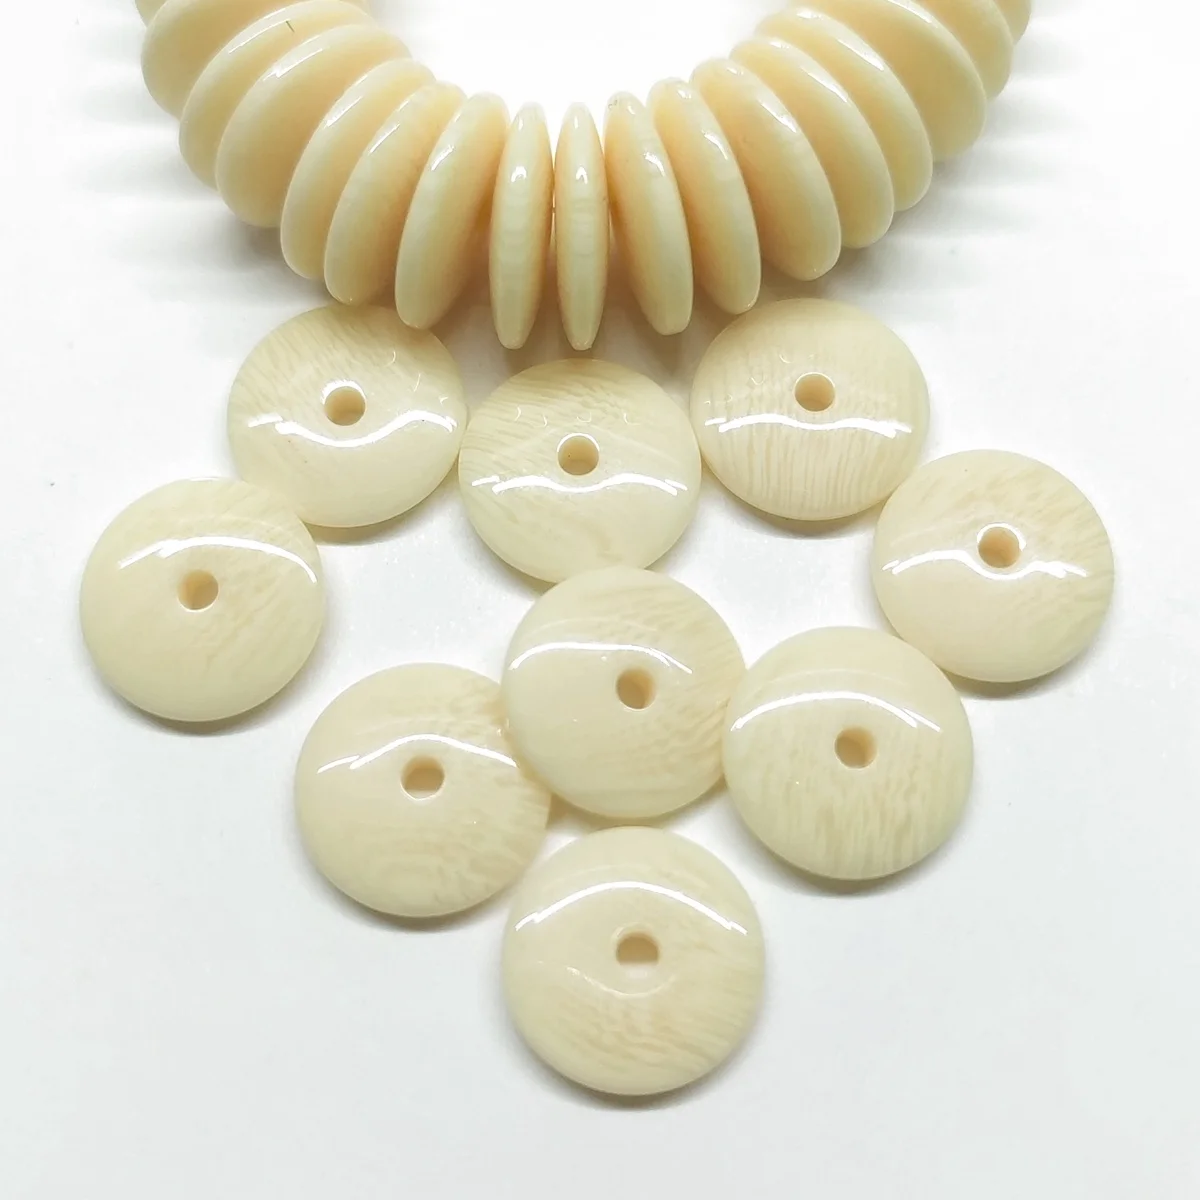 100pcs Beige Flat Round Resin Resin Imitation Ivory 6mm 8mm 10mm 12mm Loose Spacer Beads Wholesale lot for Jewelry Making flat electric welding carbon electrode air pointed gouging gods 4mm 5mm 6mm 7mm 8mm 10mm 12mm